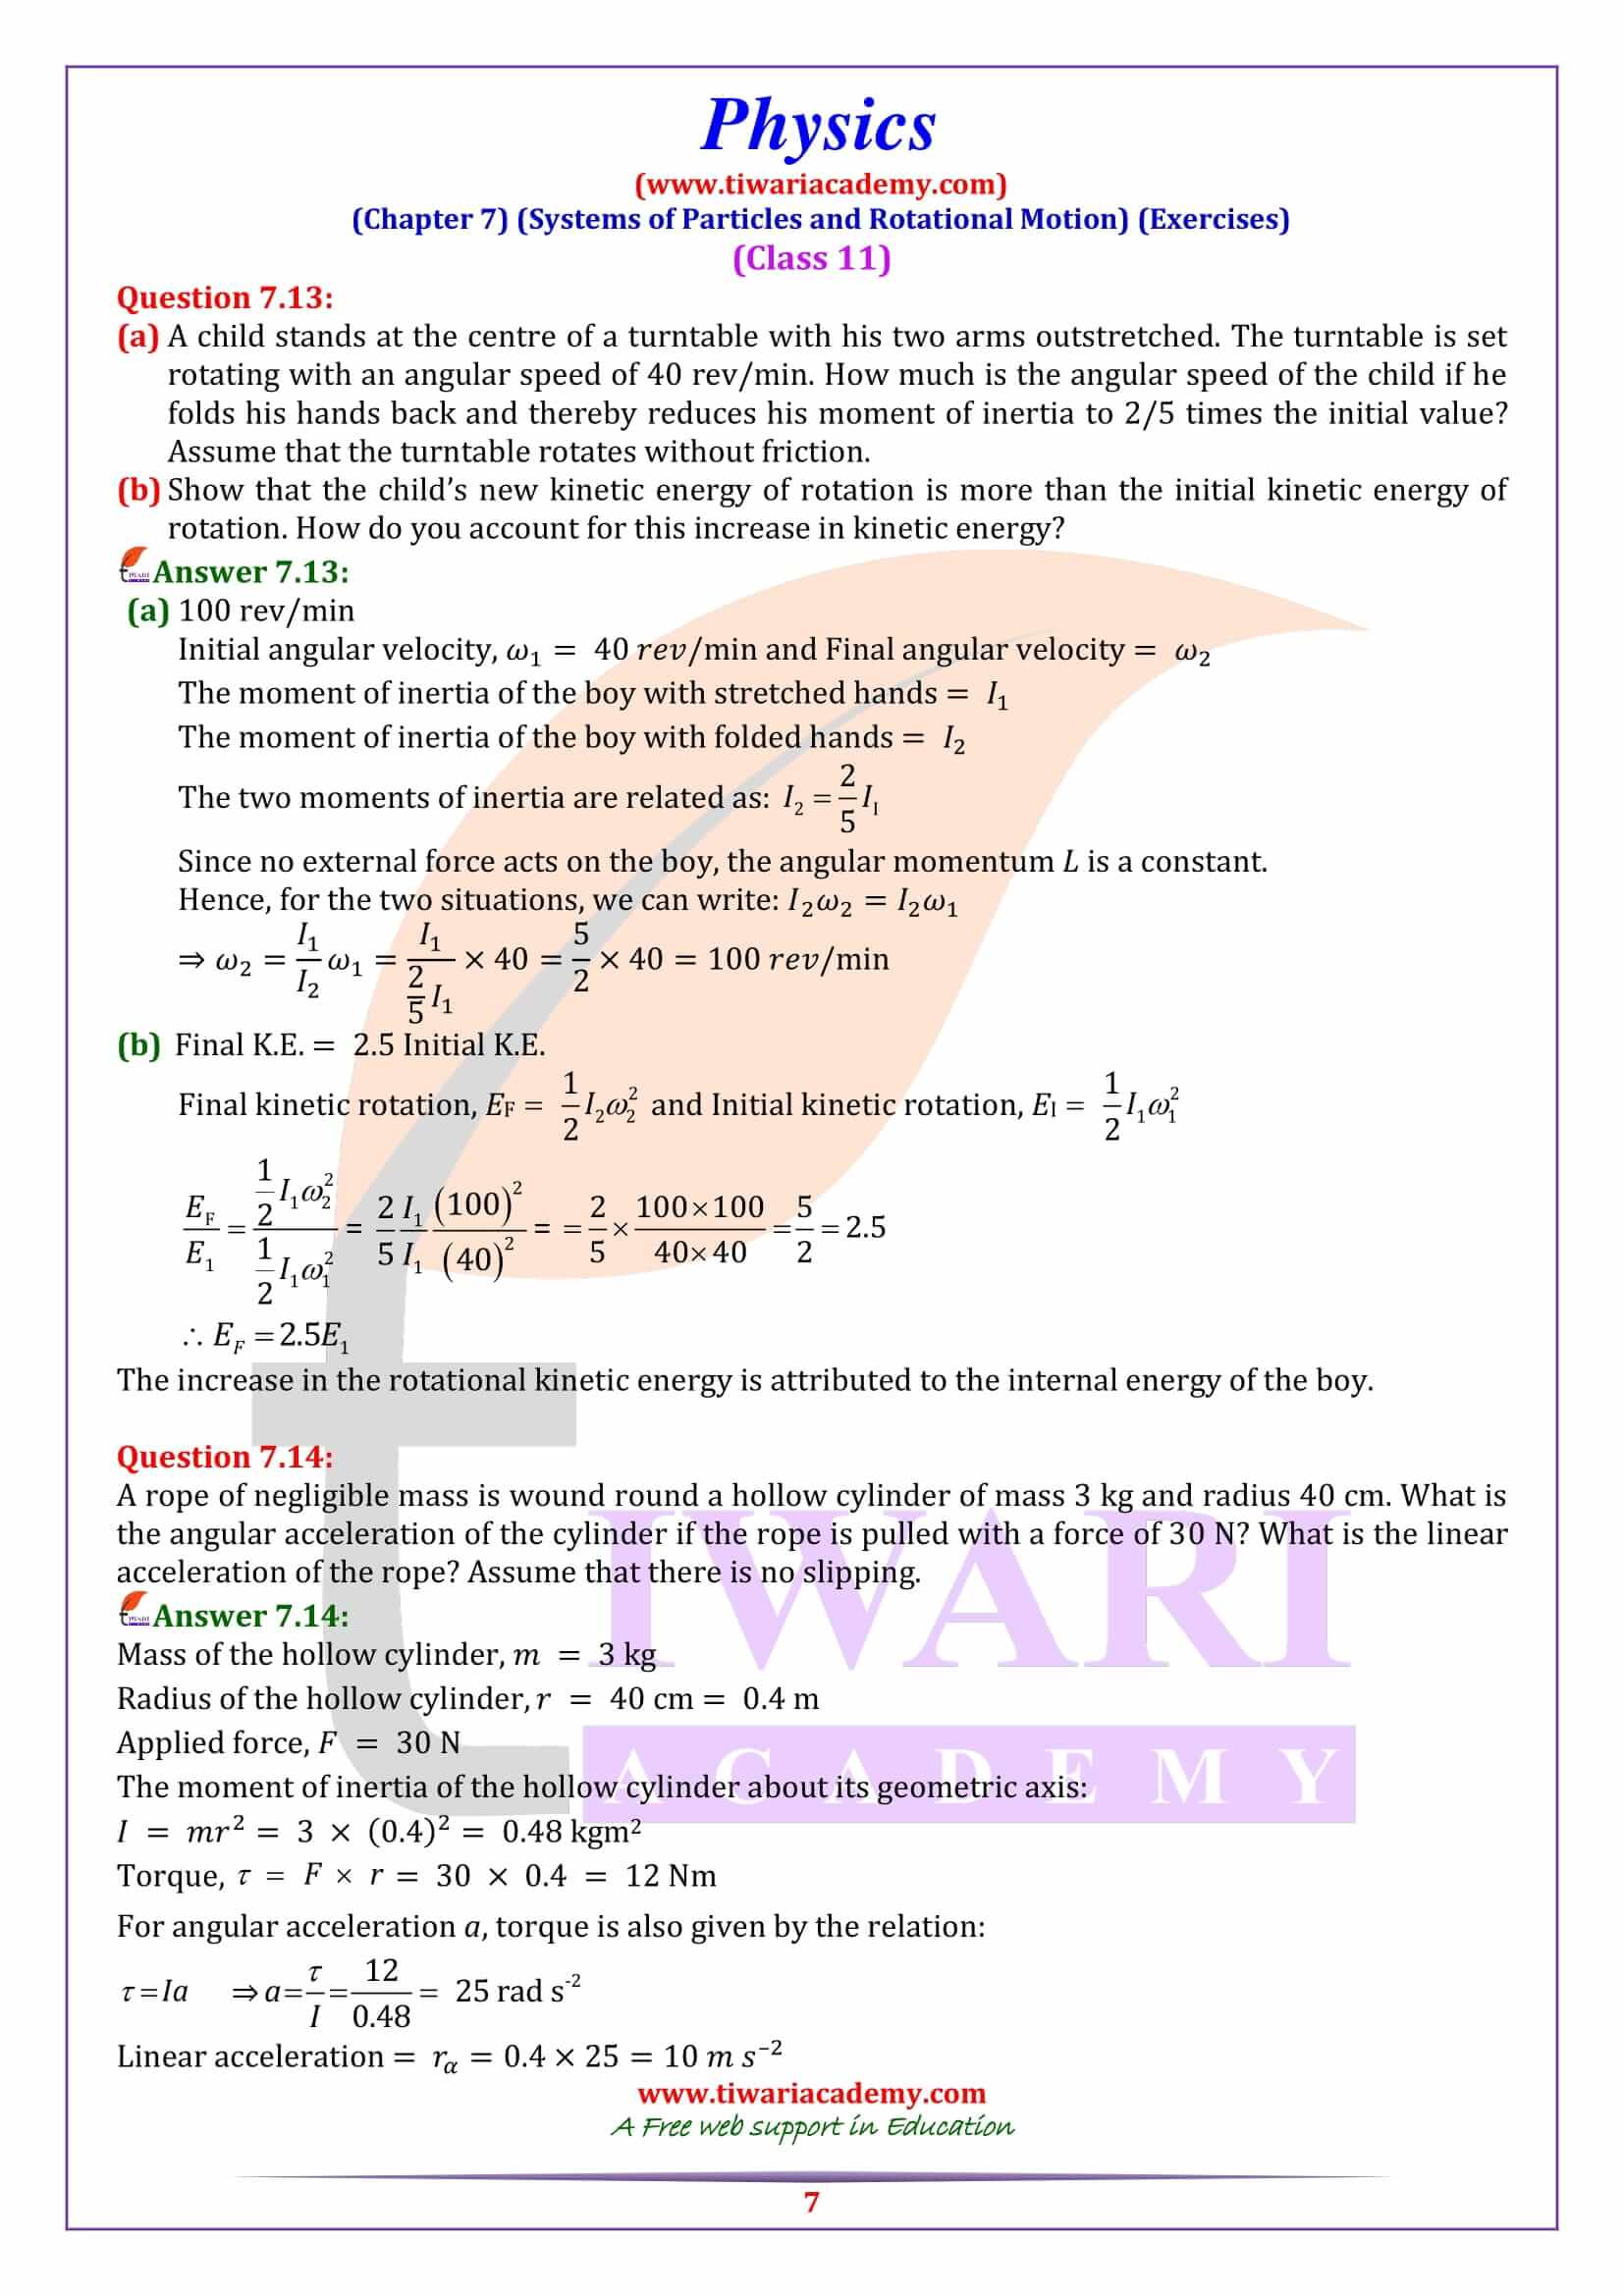 Class 11 Physics Chapter 7 Exercise in PDF file